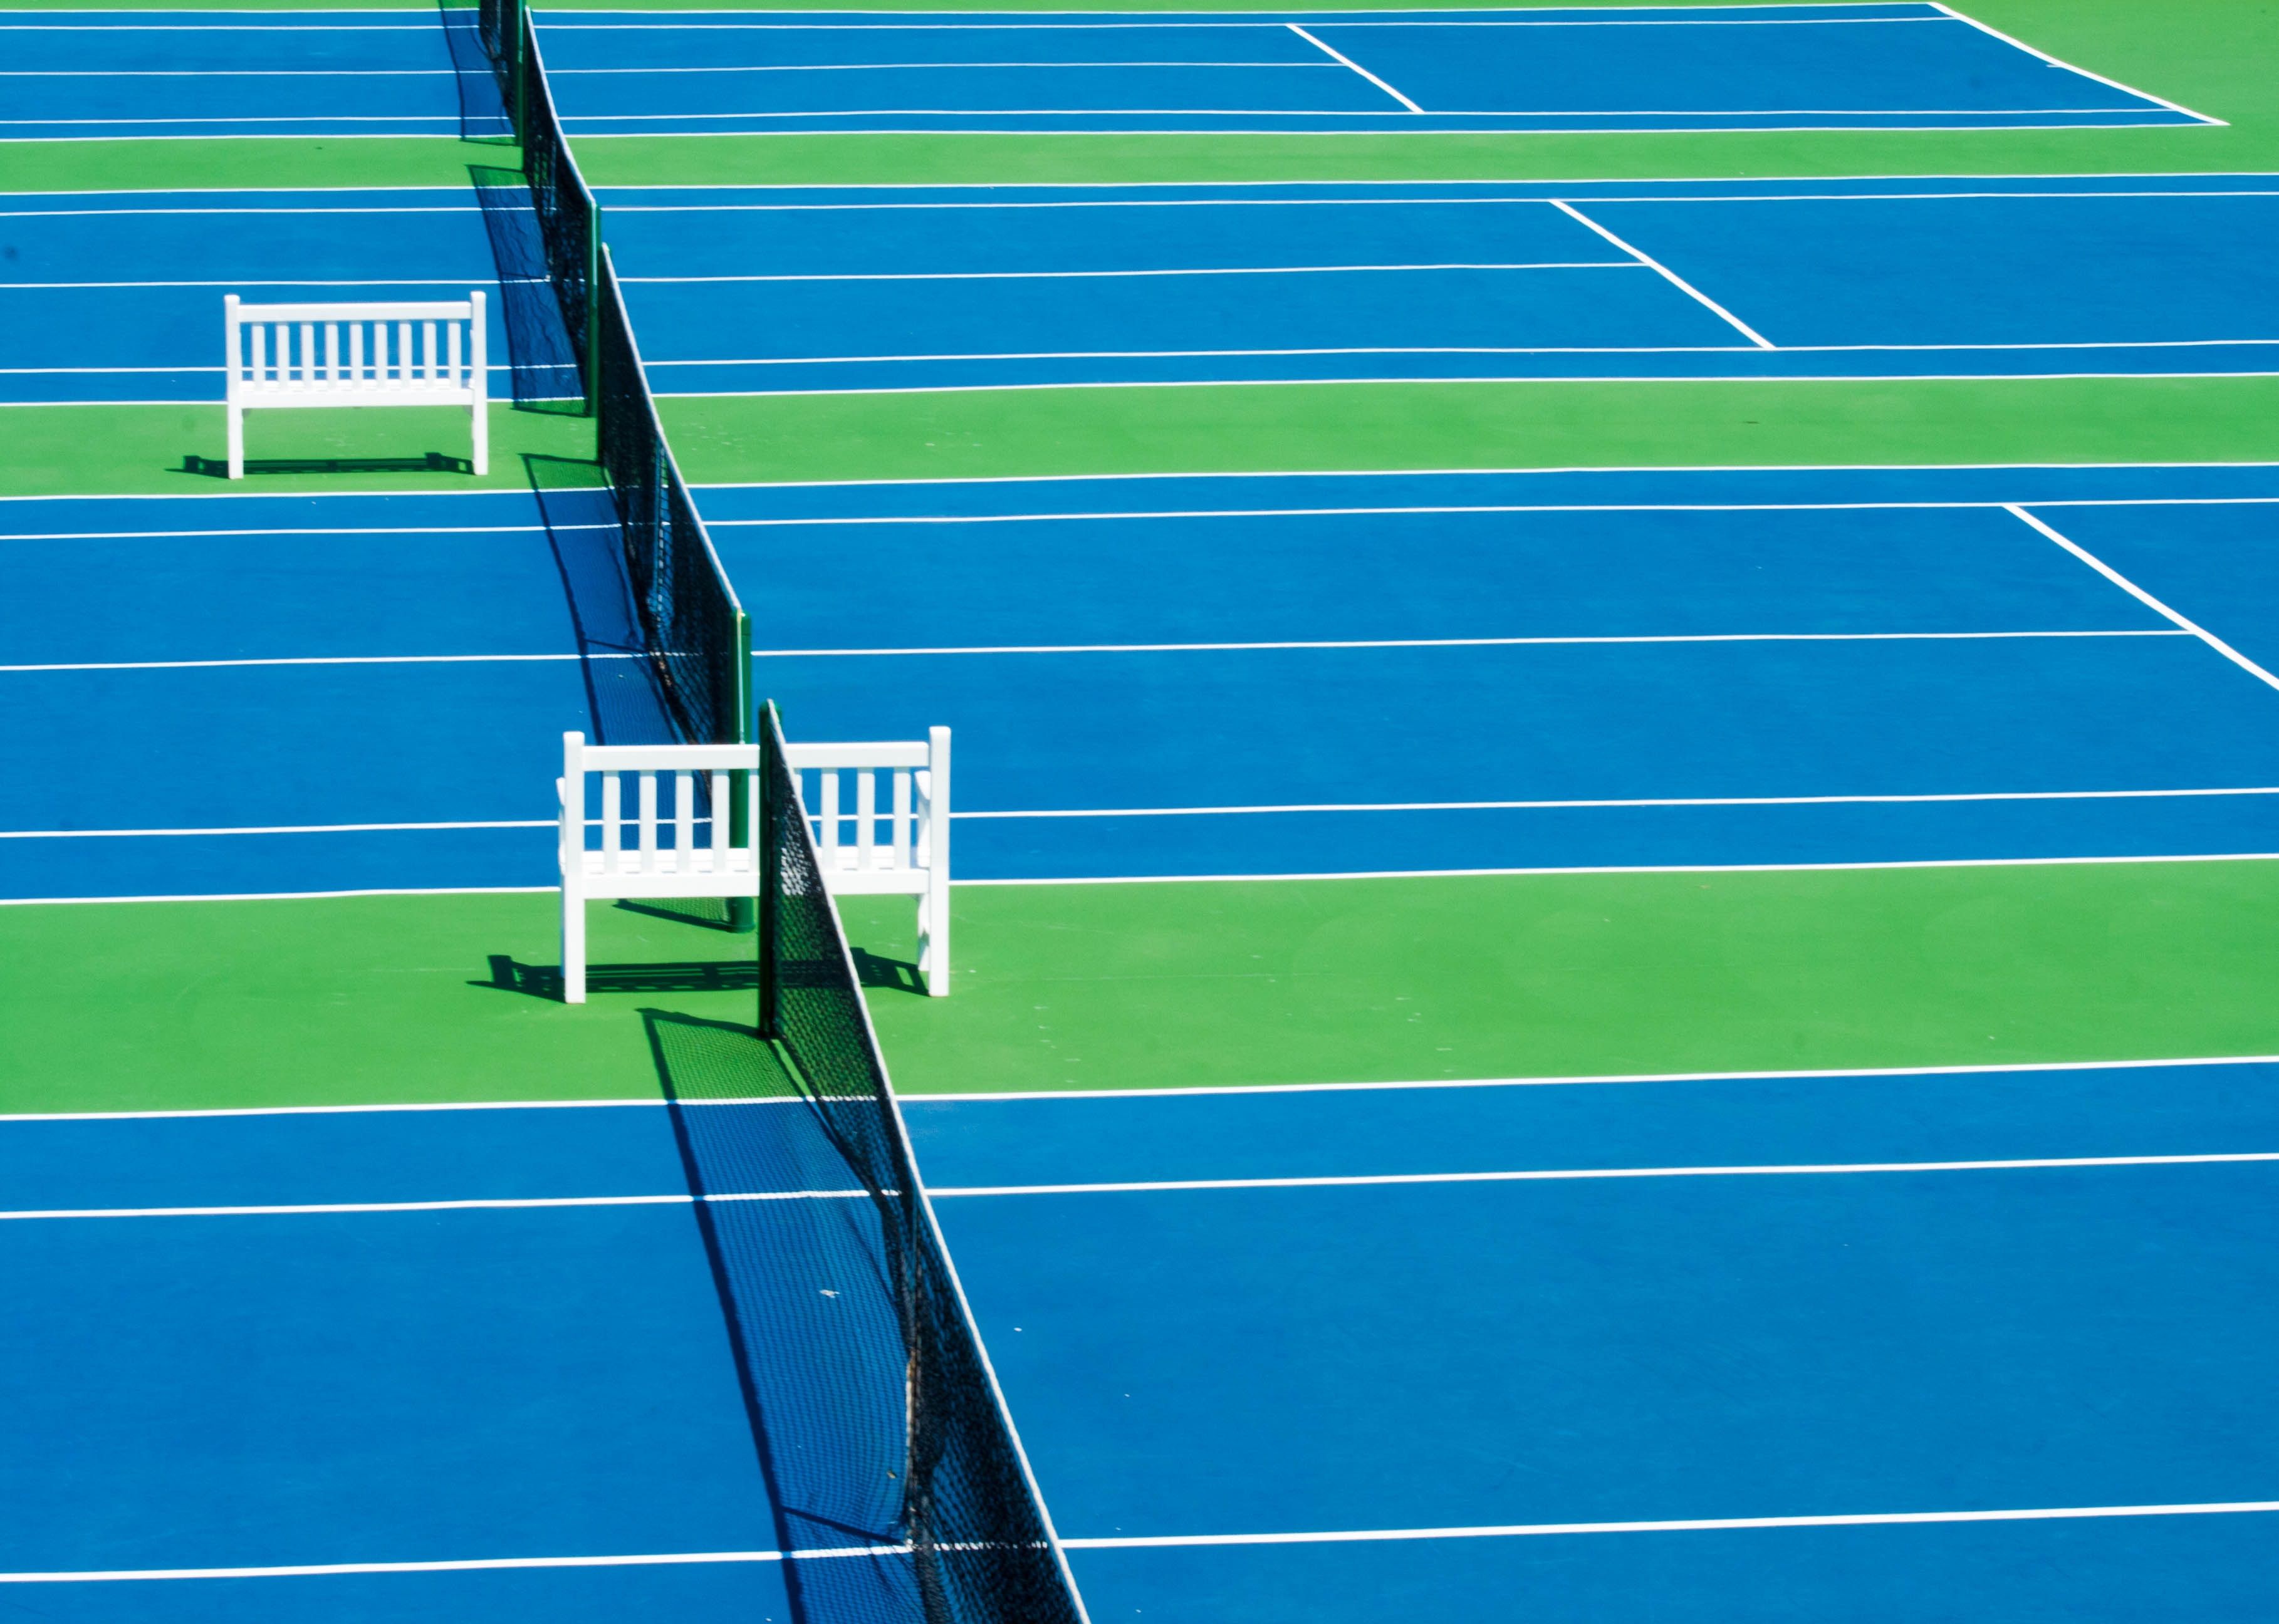 3637x2592 #line, #blue, #bench, #PNG image, #green, #net